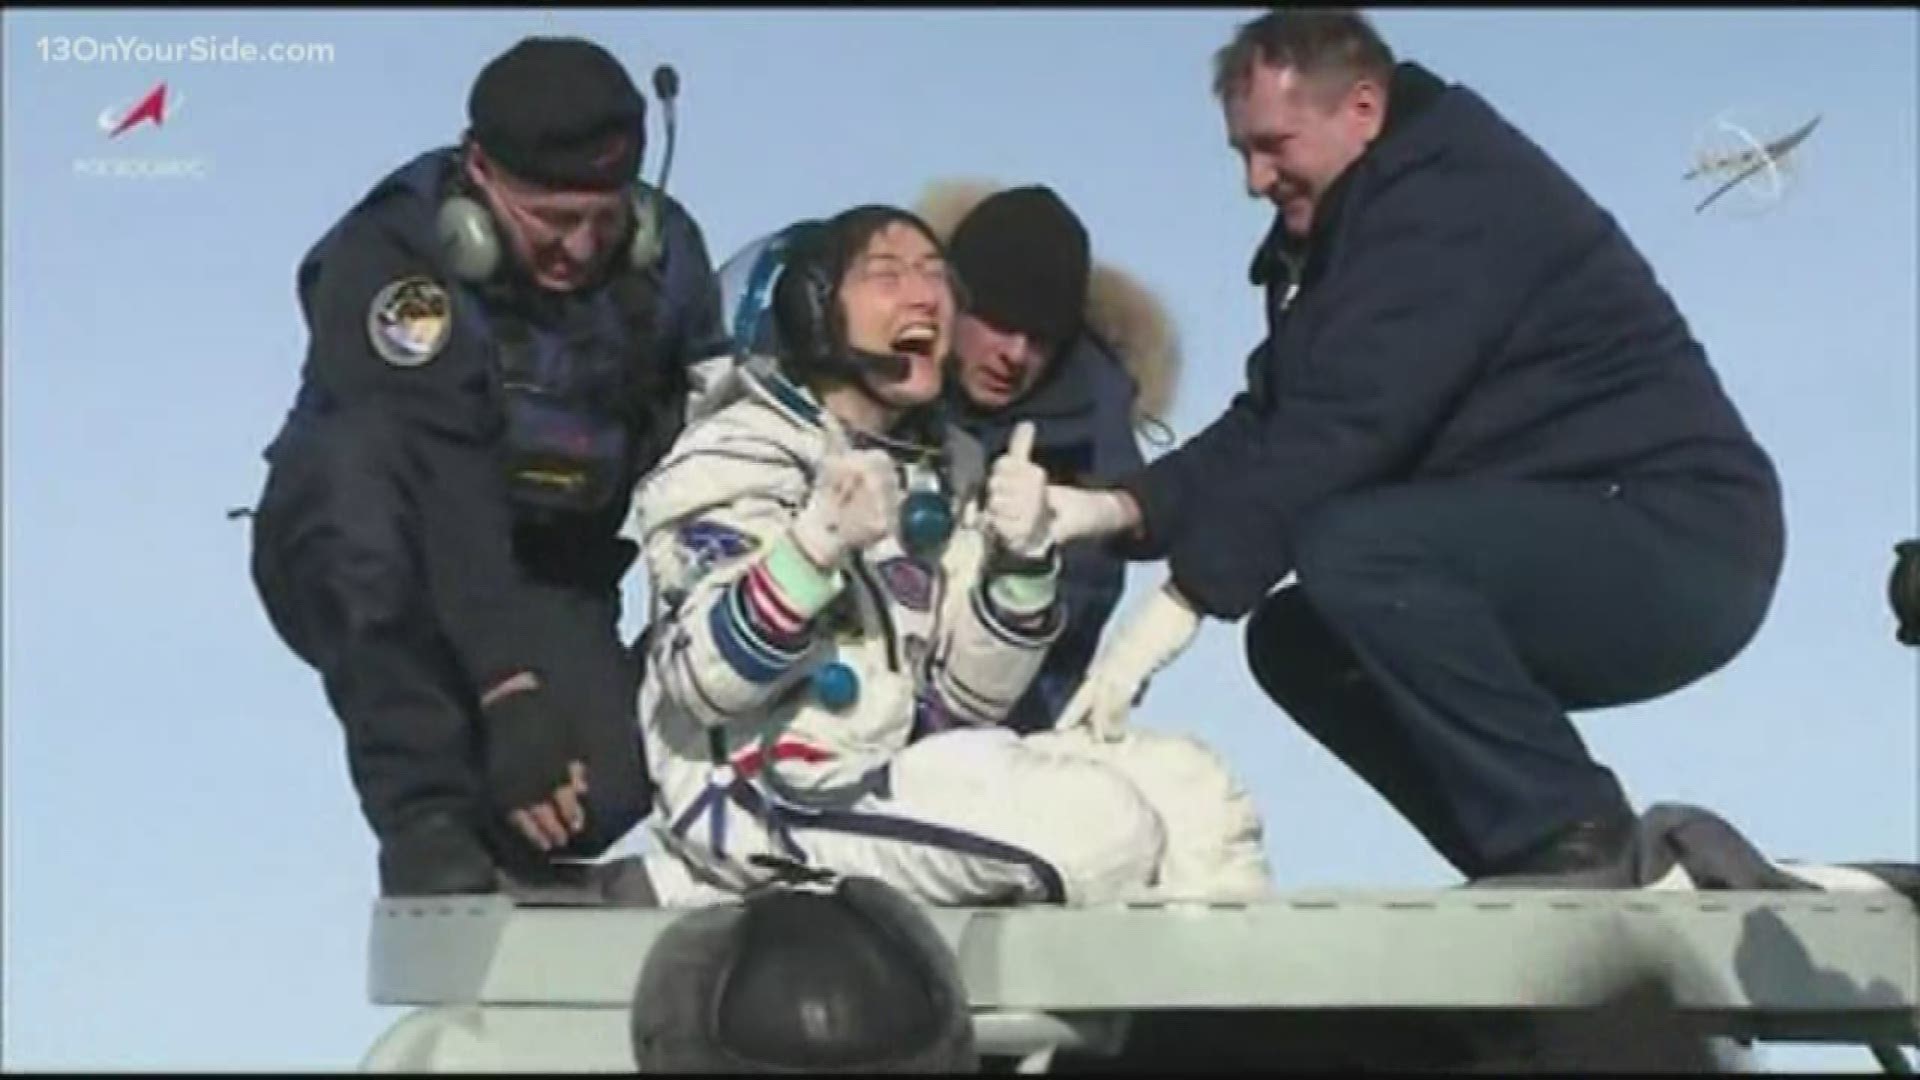 An astronaut who was born in Grand Rapids, Michigan is returning to Earth Thursday, Feb. 6, after breaking records for her consecutive time in space.